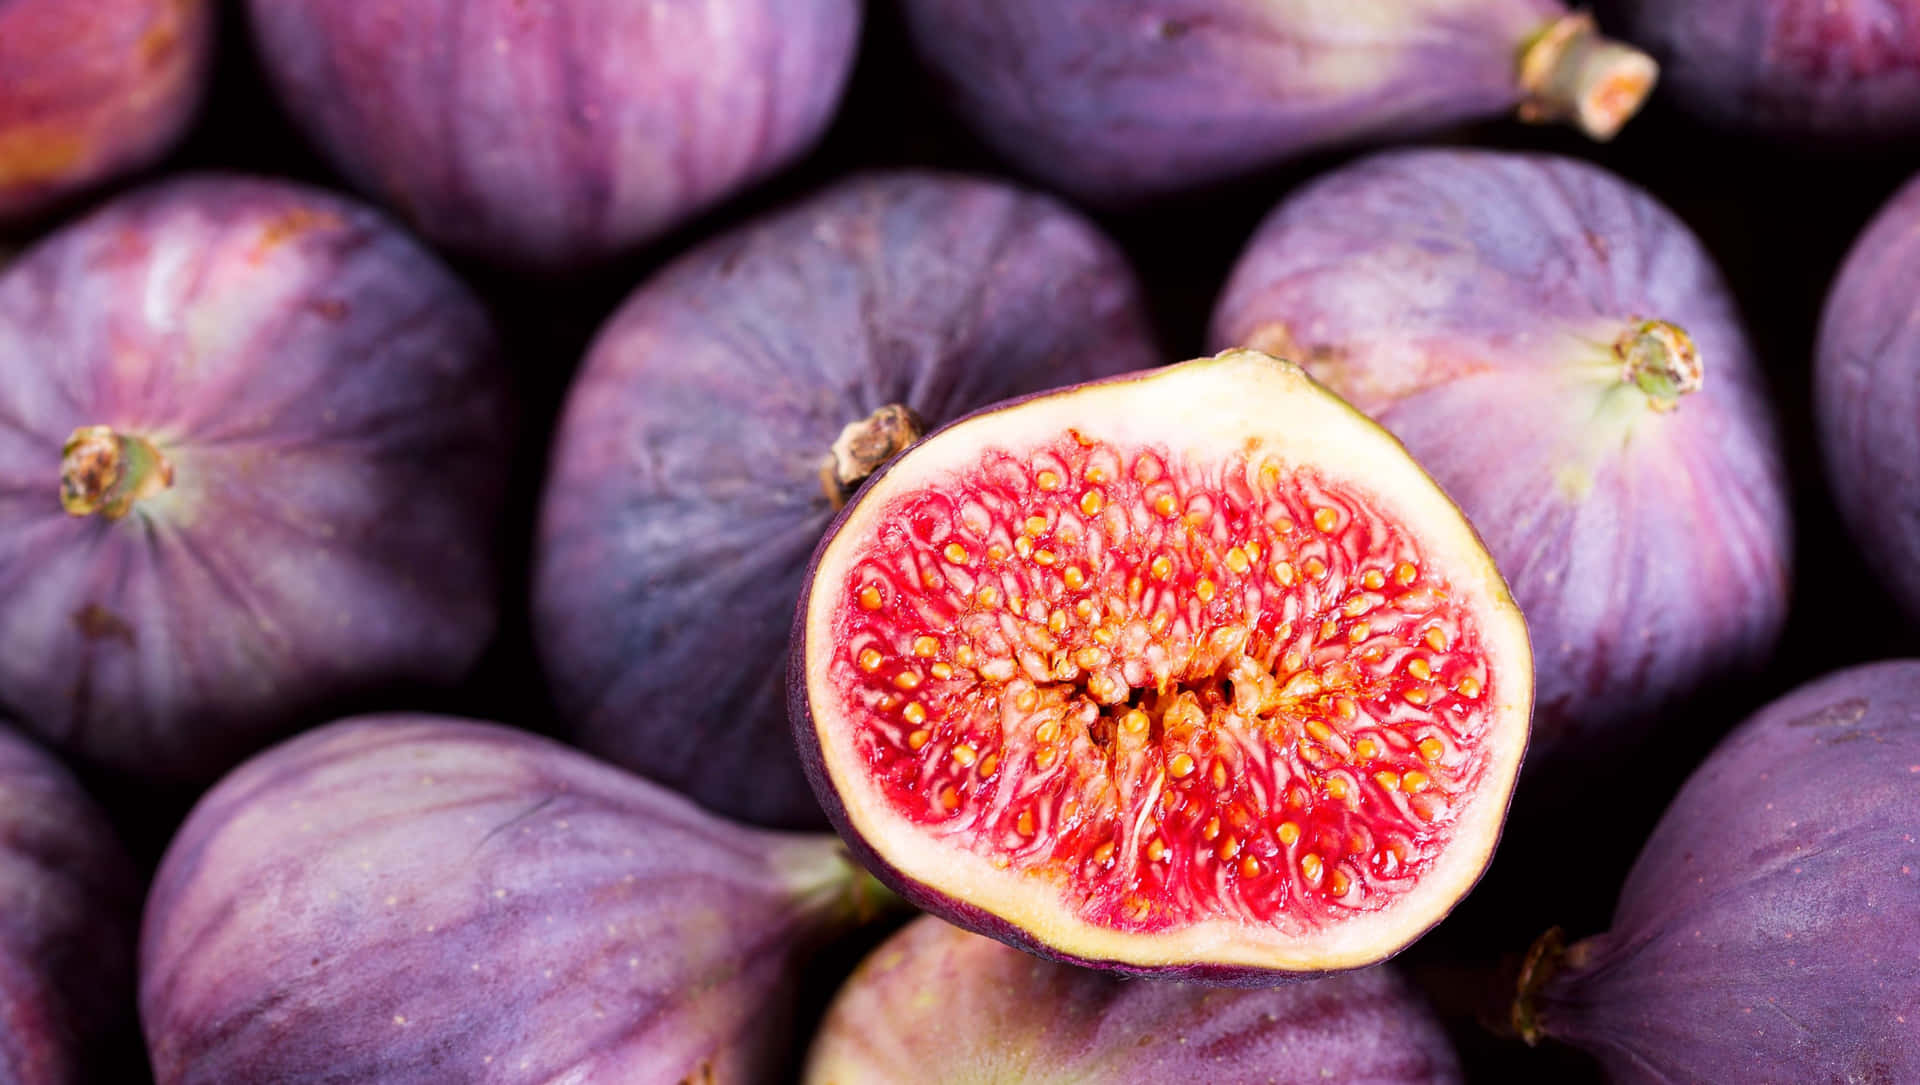 Image  Freshly Harvested Purple Figs, Nature's Delicious Treat Wallpaper